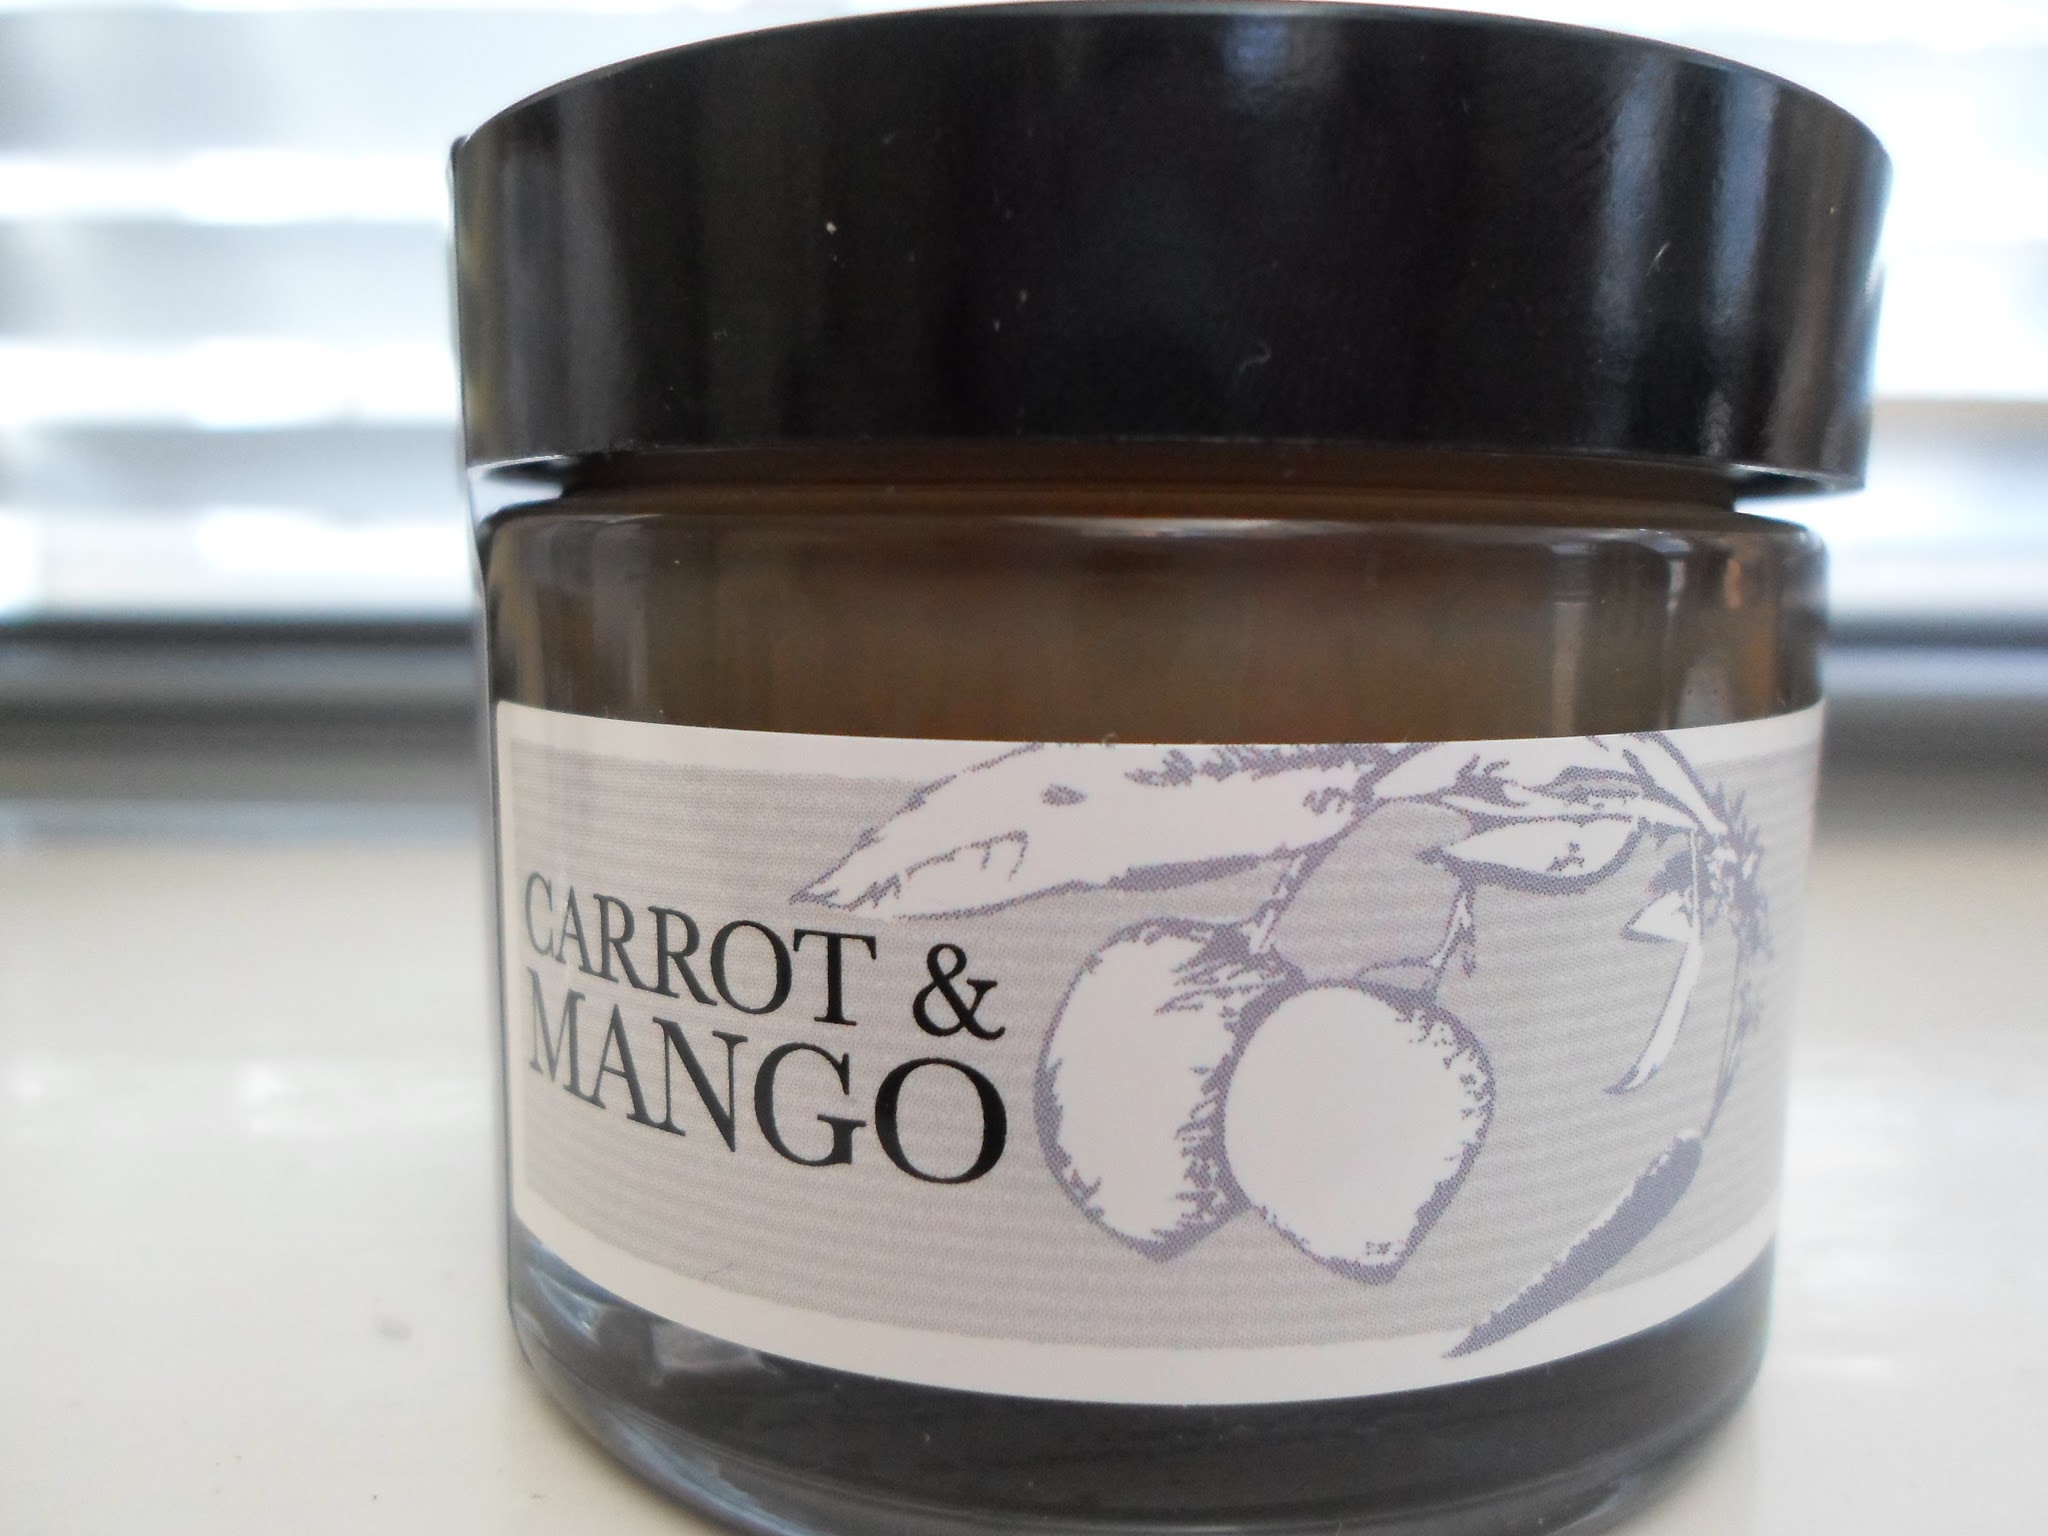 Review The Rose Tree Carrot & Mango Cleansing Balm